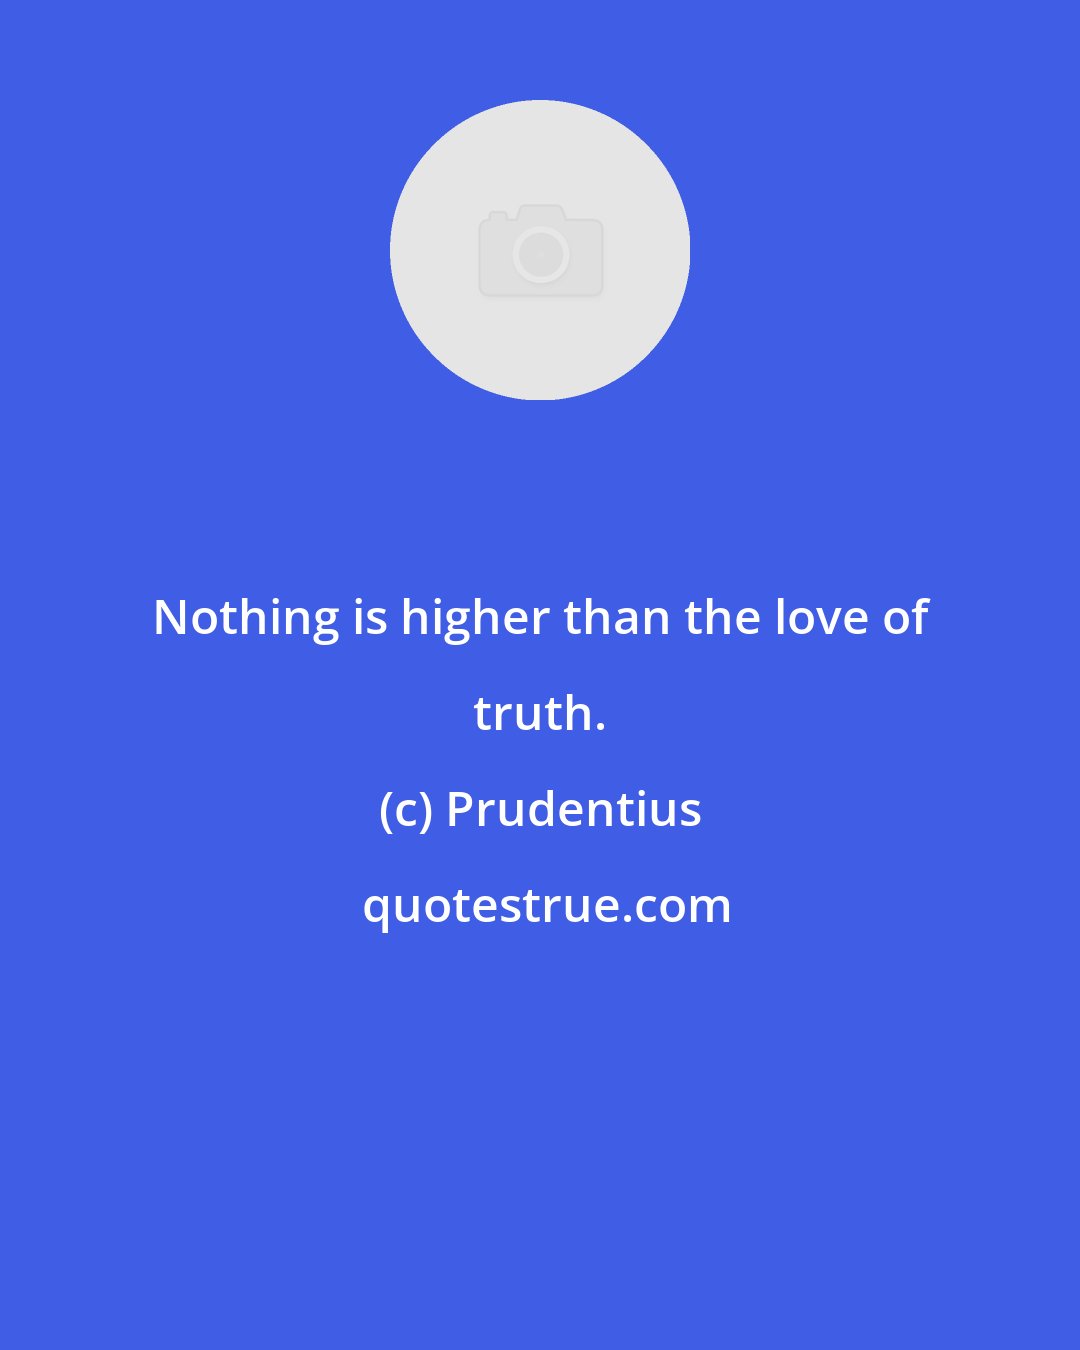 Prudentius: Nothing is higher than the love of truth.